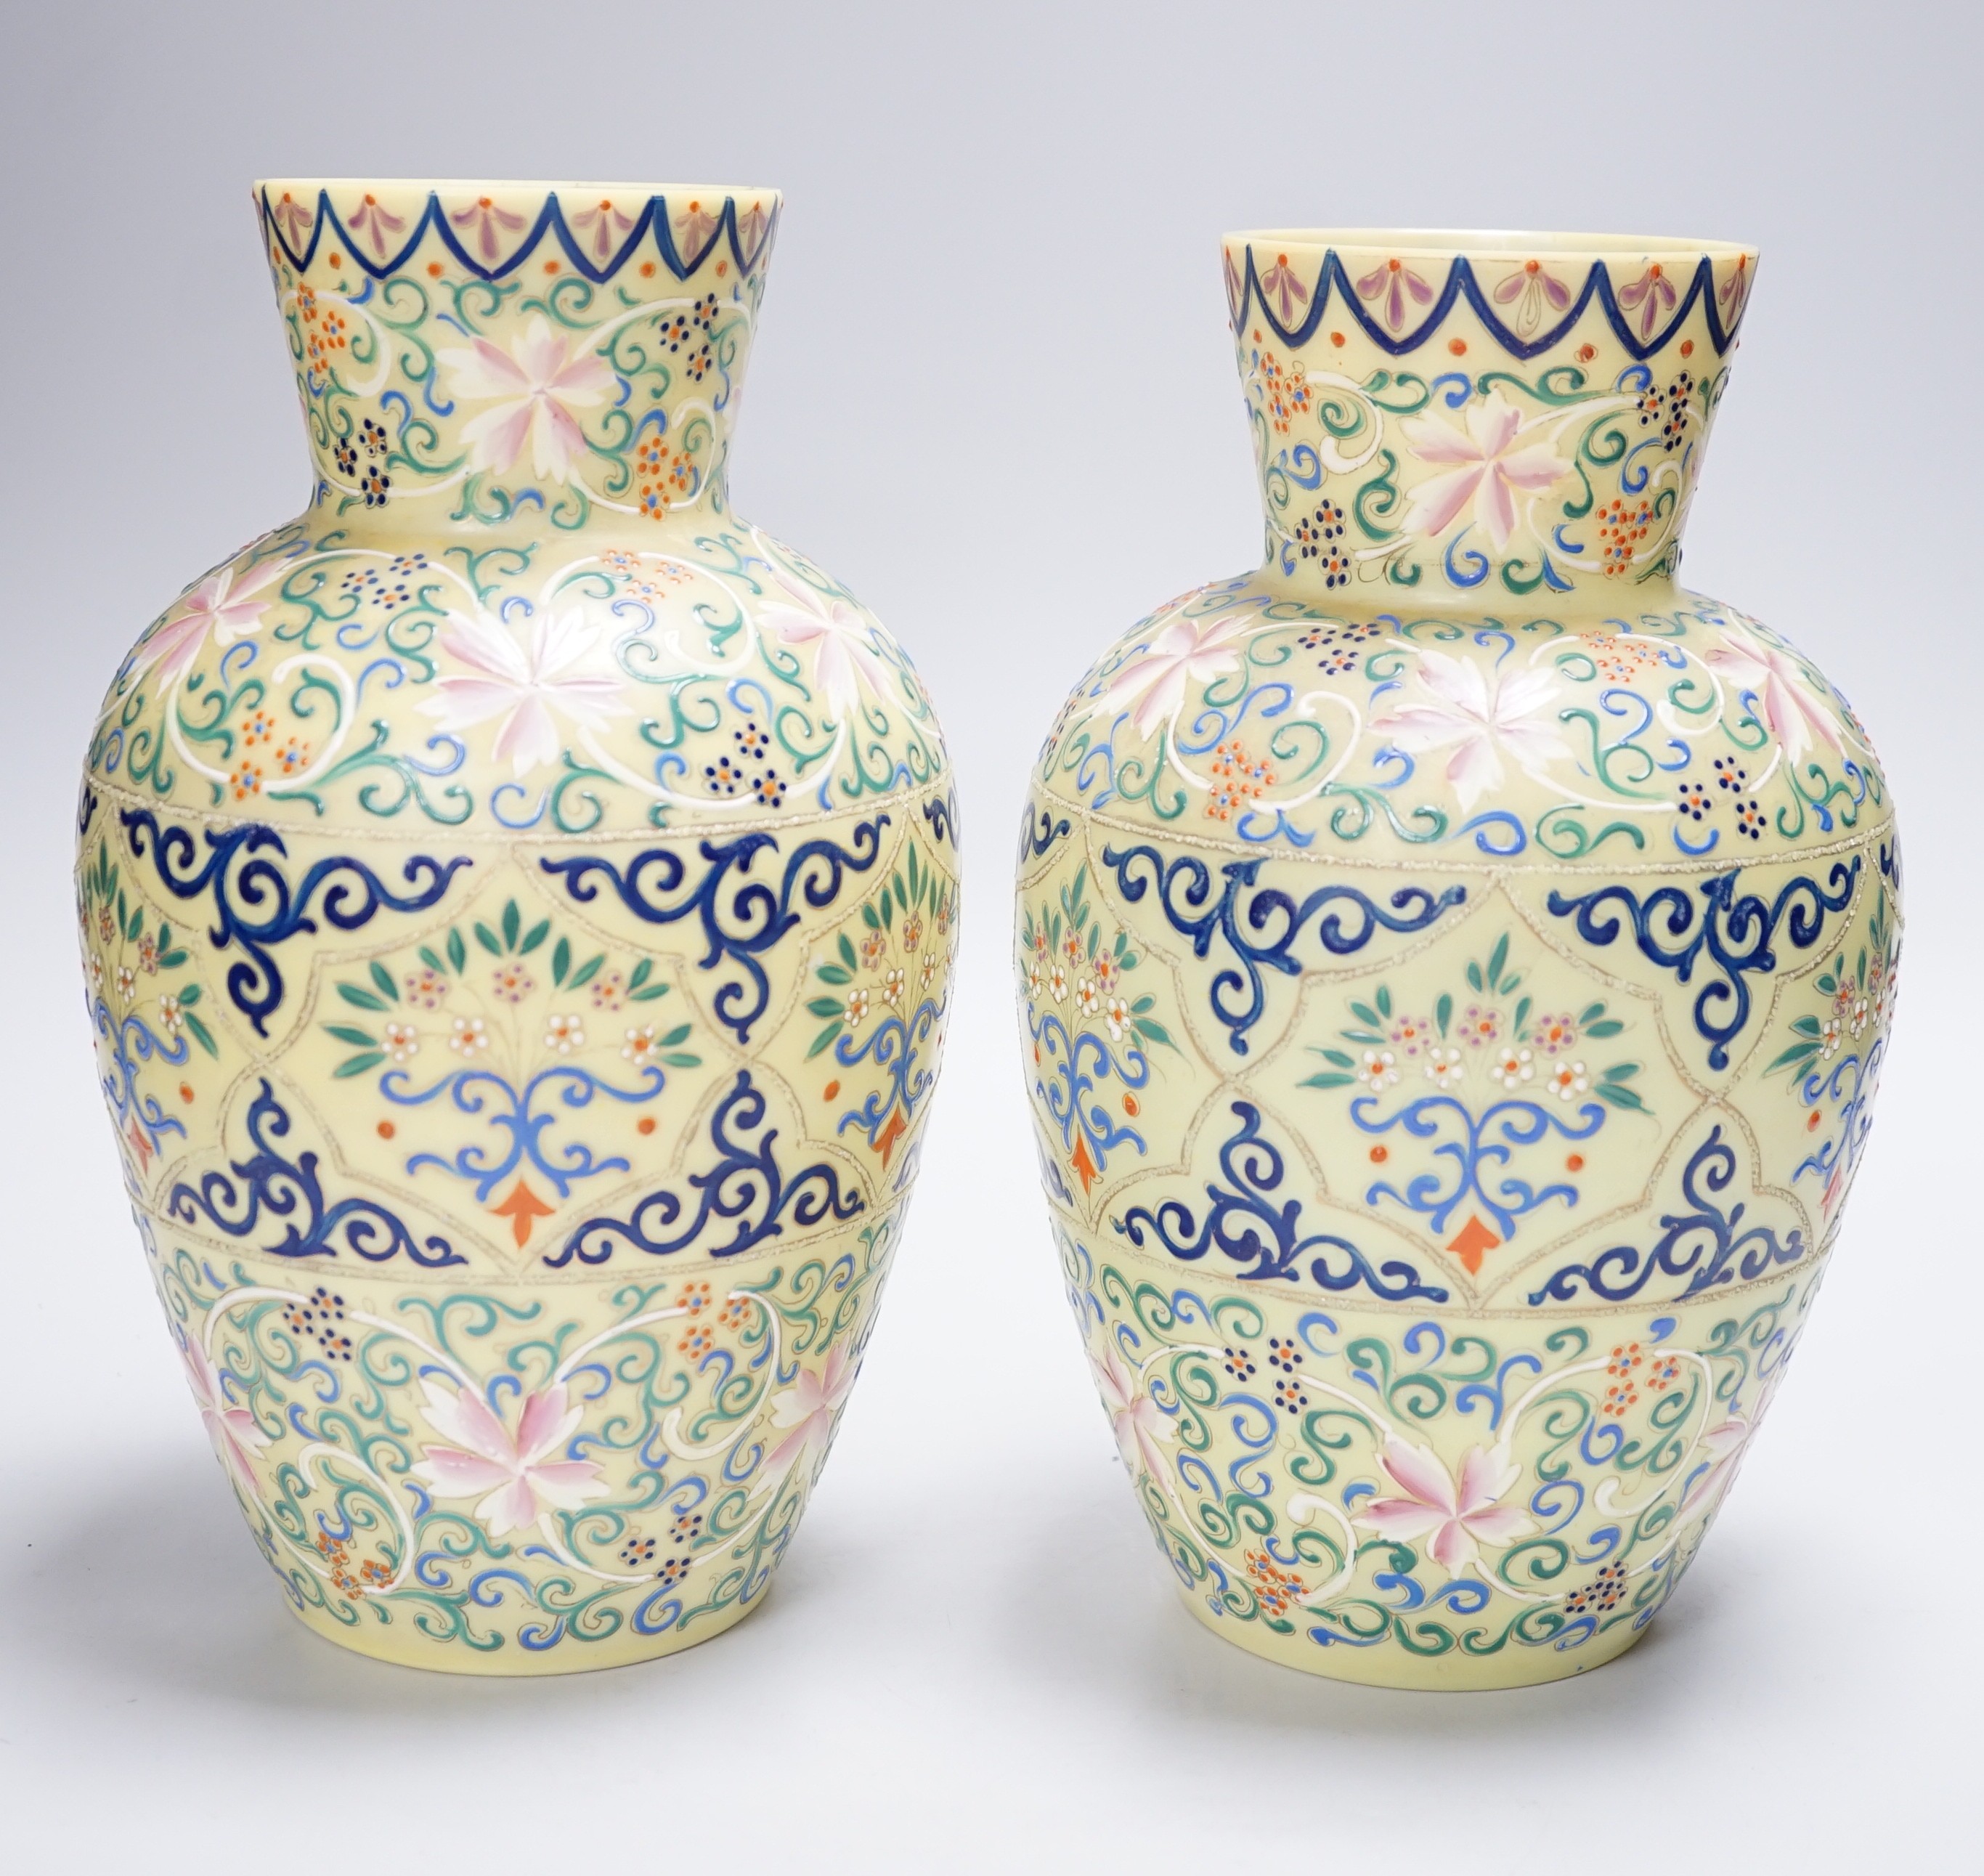 A pair of French enamelled glass vases, Persian inspired, 25.5cm